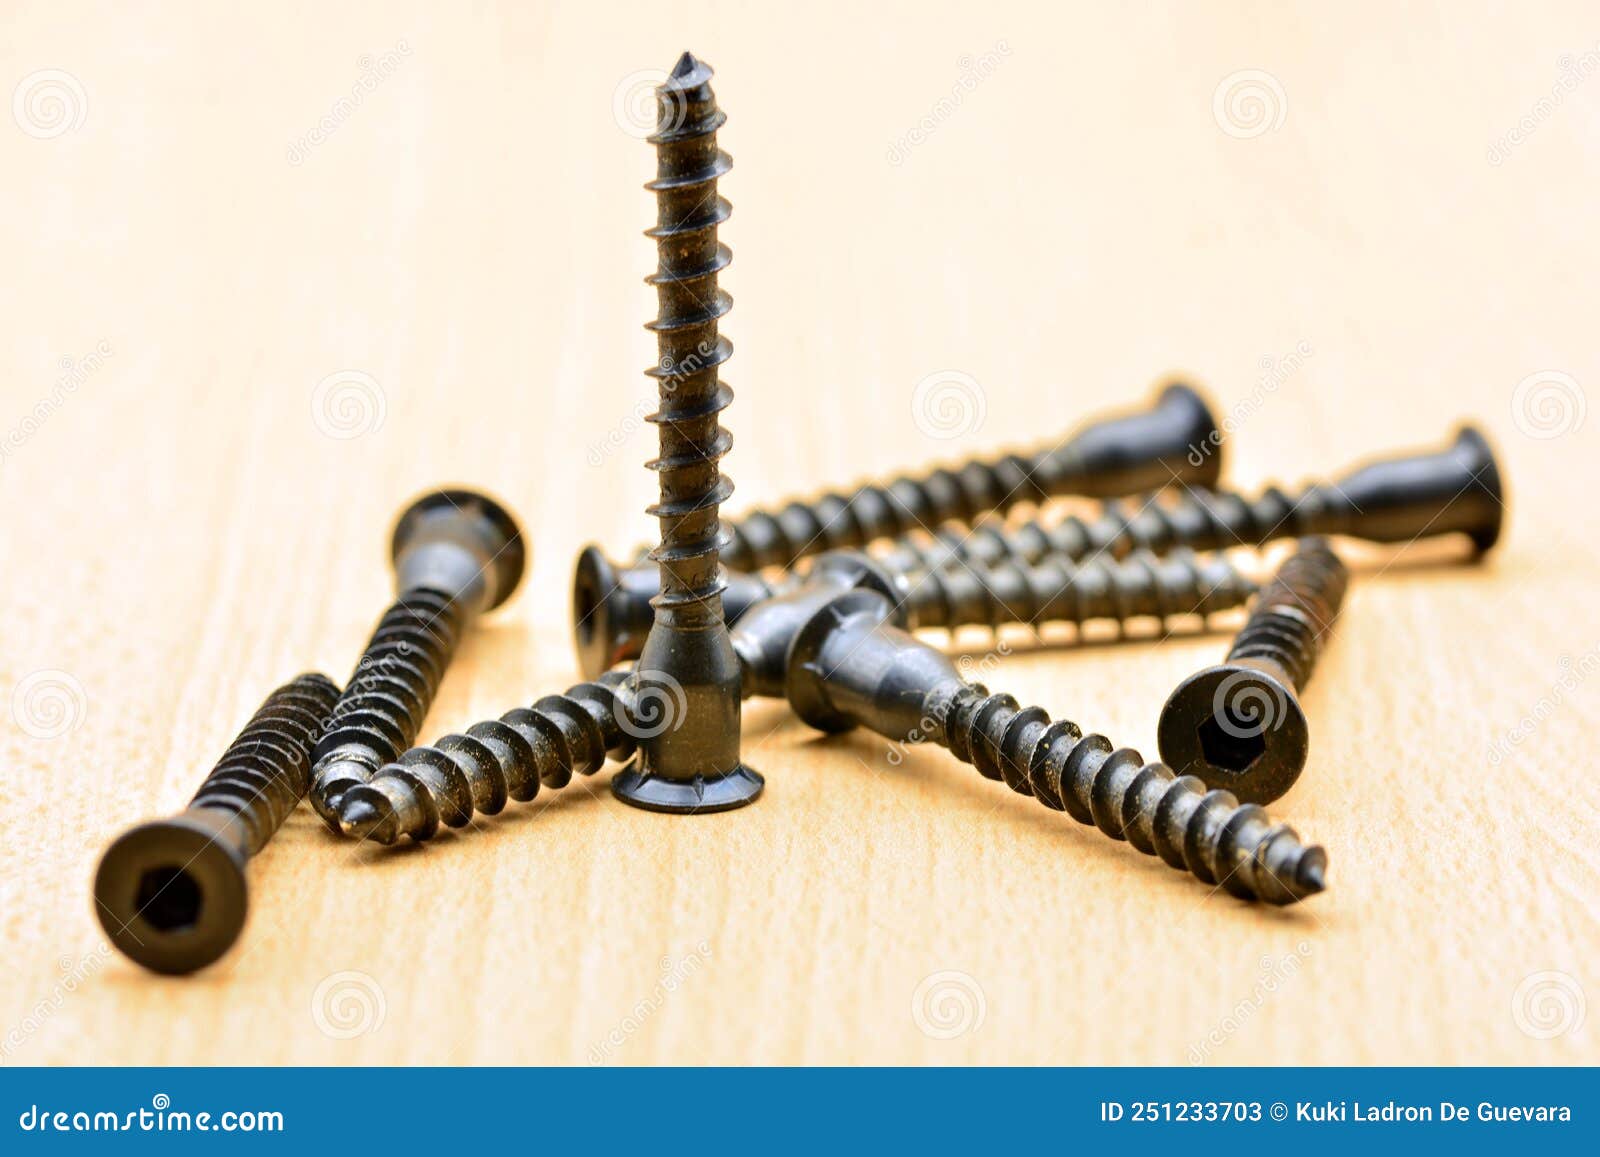 detail of a group of self-tapping screws